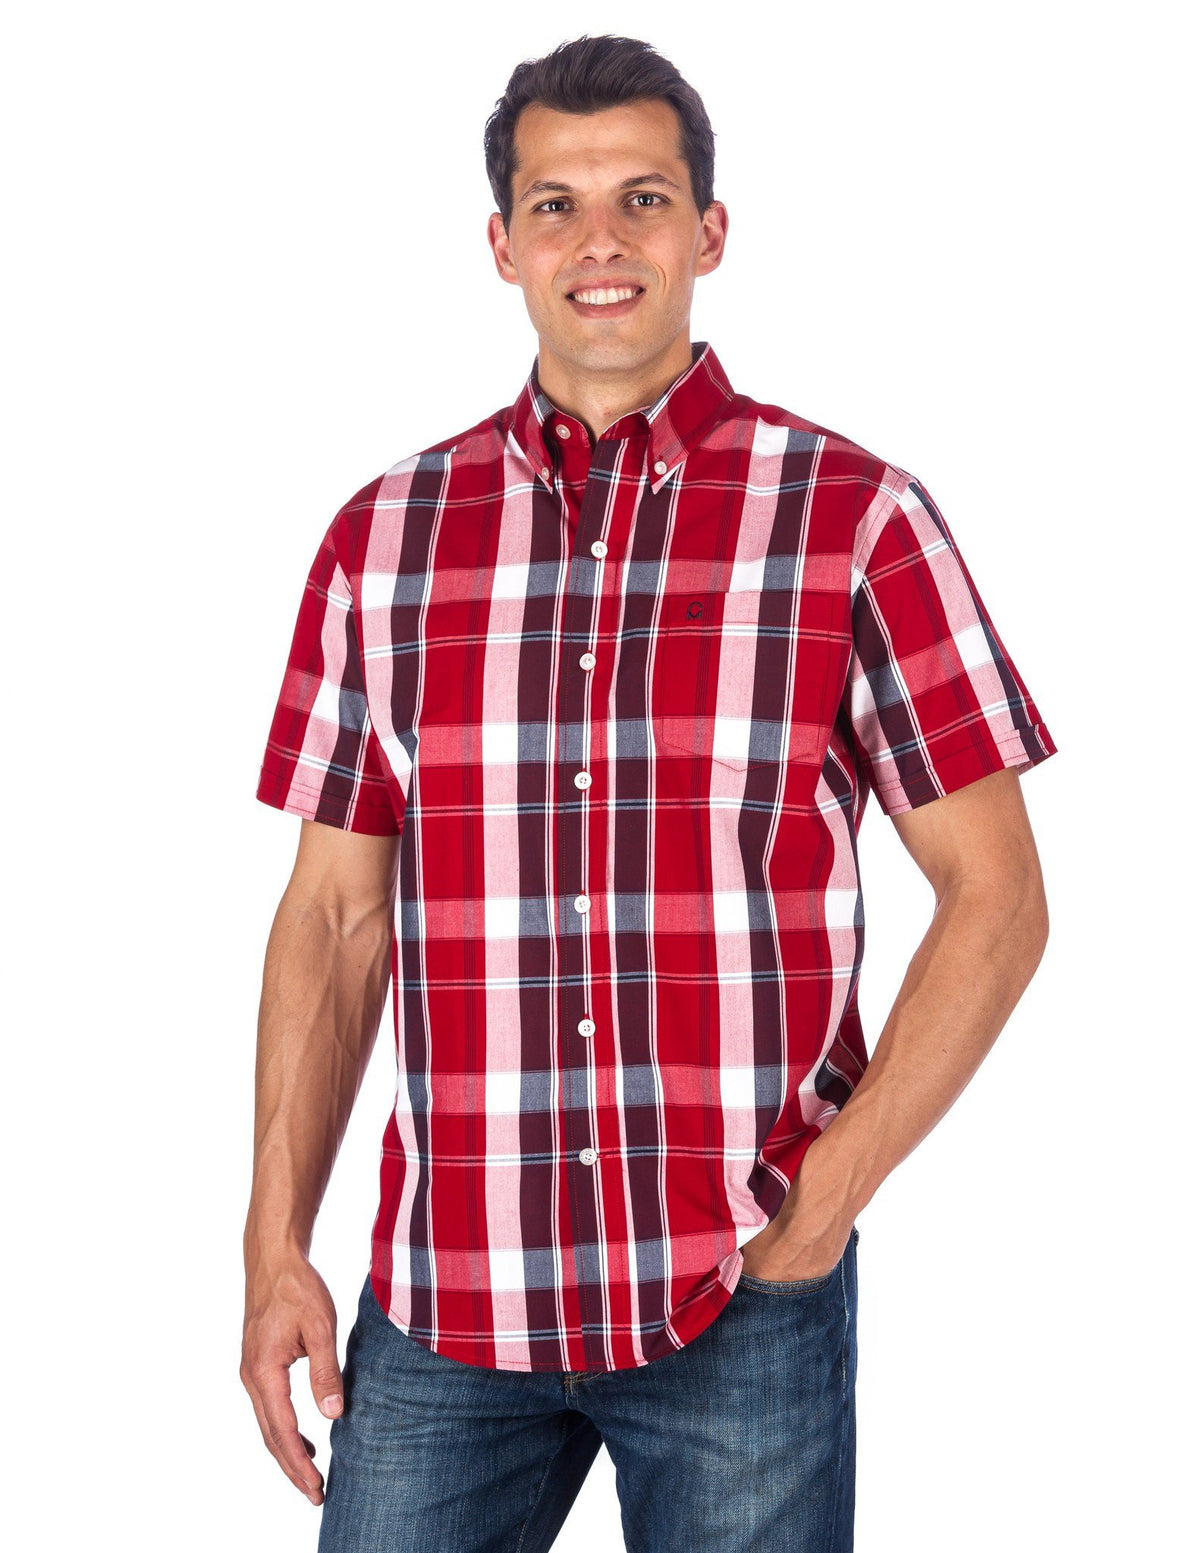 Men's 100% Cotton Casual Short Sleeve Shirt - Regular Fit - Plaid Red/White/Navy